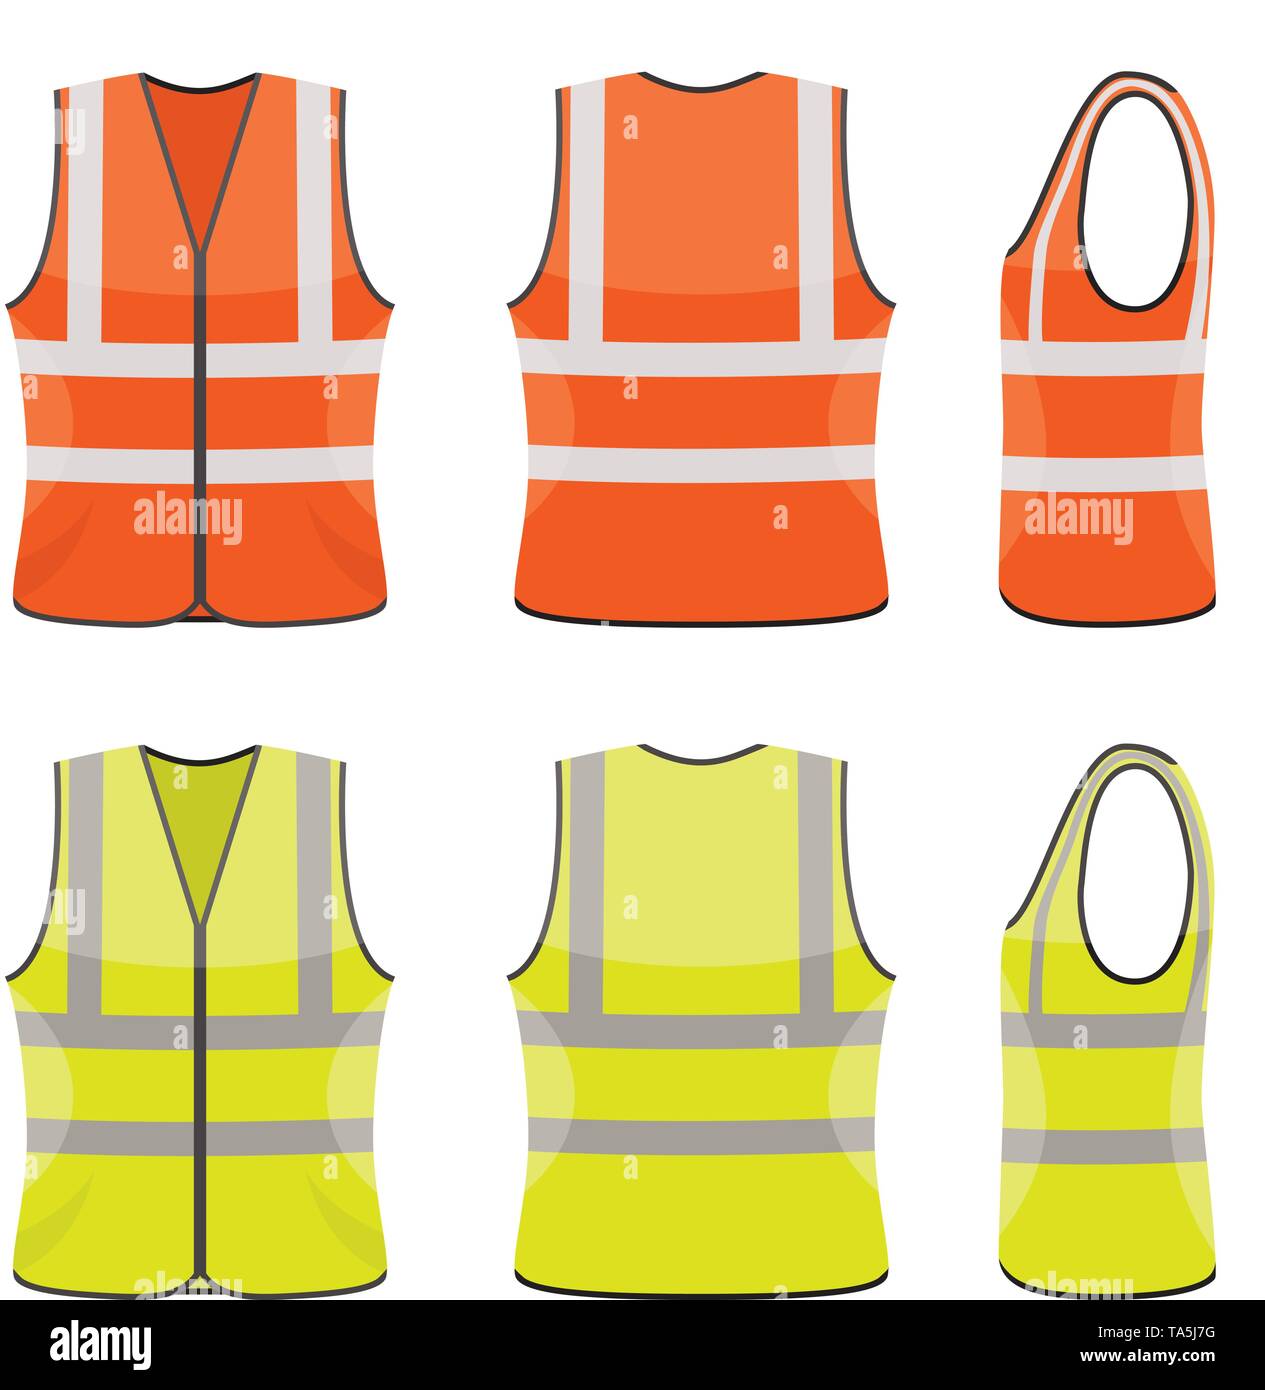 vector set of orange and yellow safety vests isolated on white